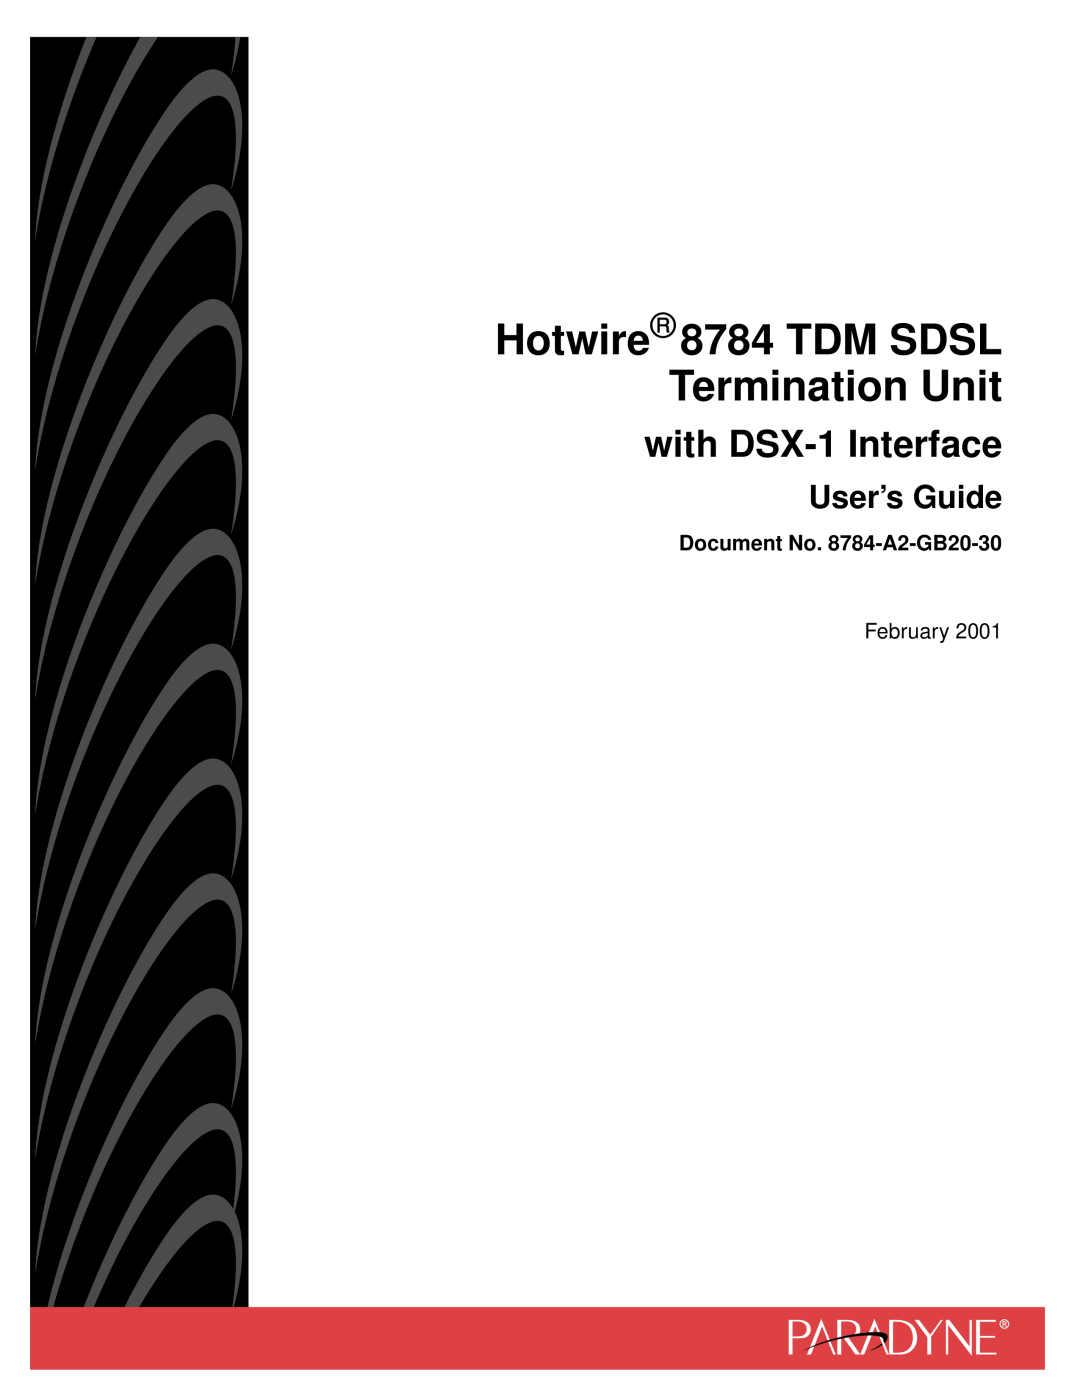 Paradyne manual Hotwire 8784 TDM SDSL Termination Unit, with DSX-1 Interface, User’s Guide, February 